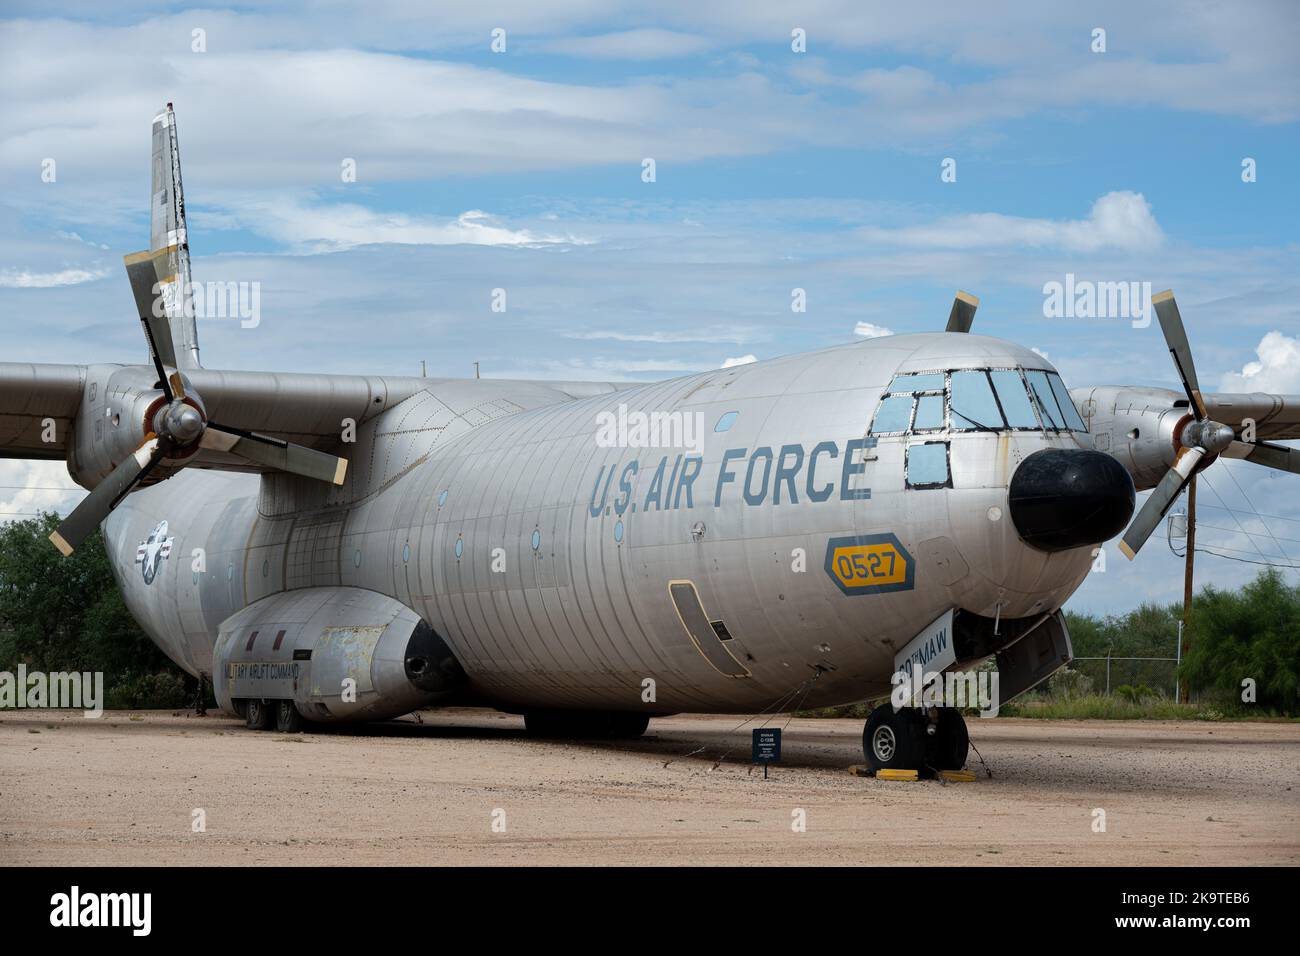 A Douglas C-133 Cargomaster on display at the Pima Air and Space Museum Stock Photo